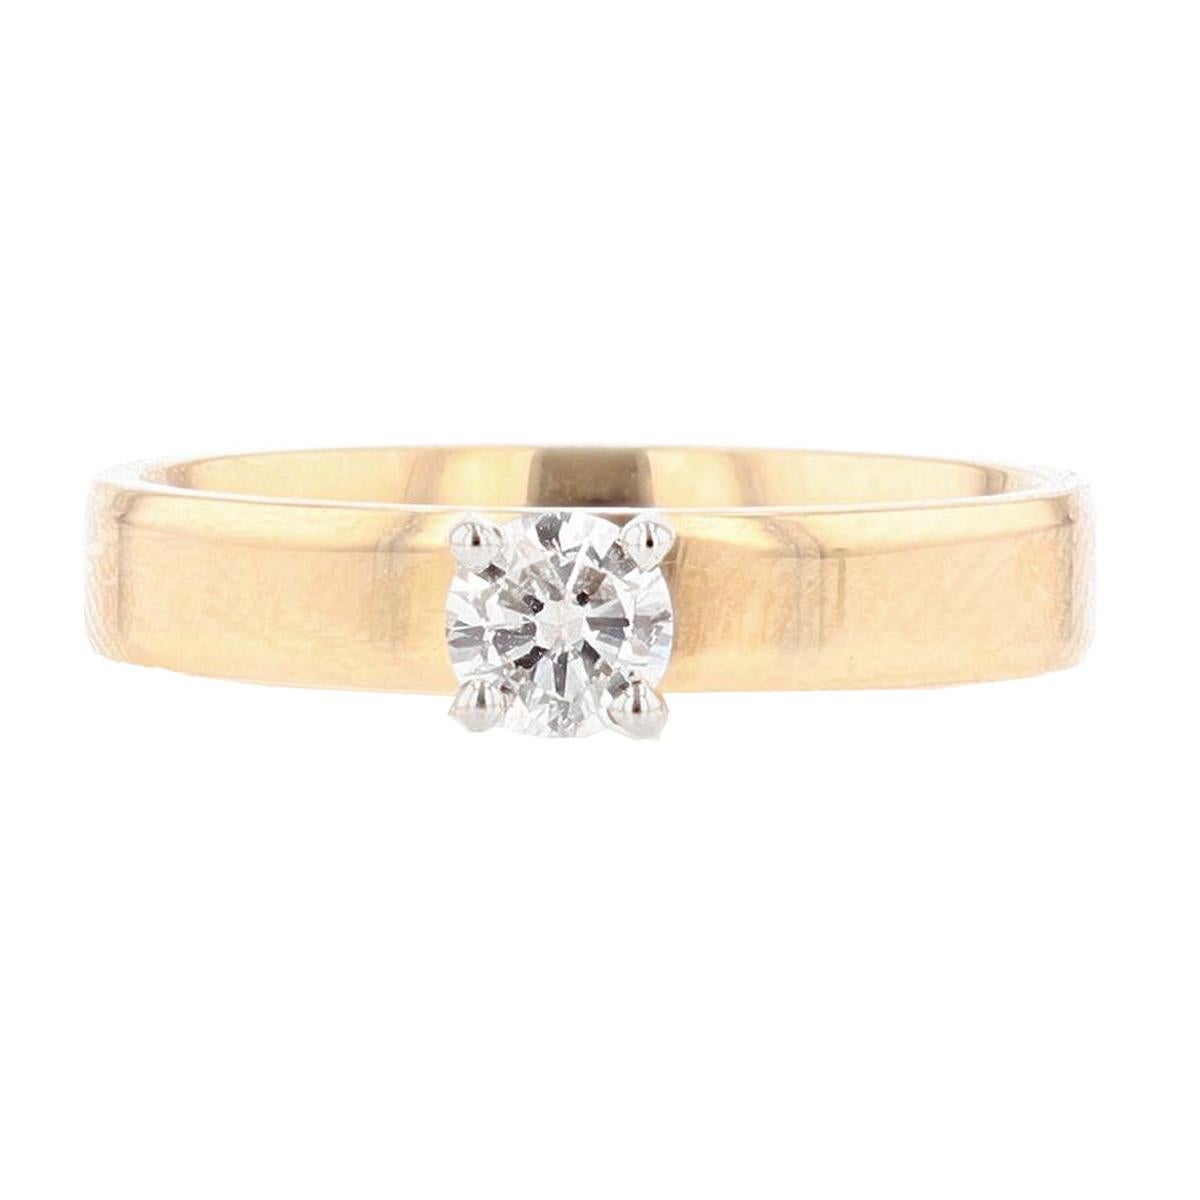 This ring is made with 14 karat yellow and white gold and features one round cut, prong set diamond weighing 0.22ct with a color grade (I) and clarity grade (I1). 